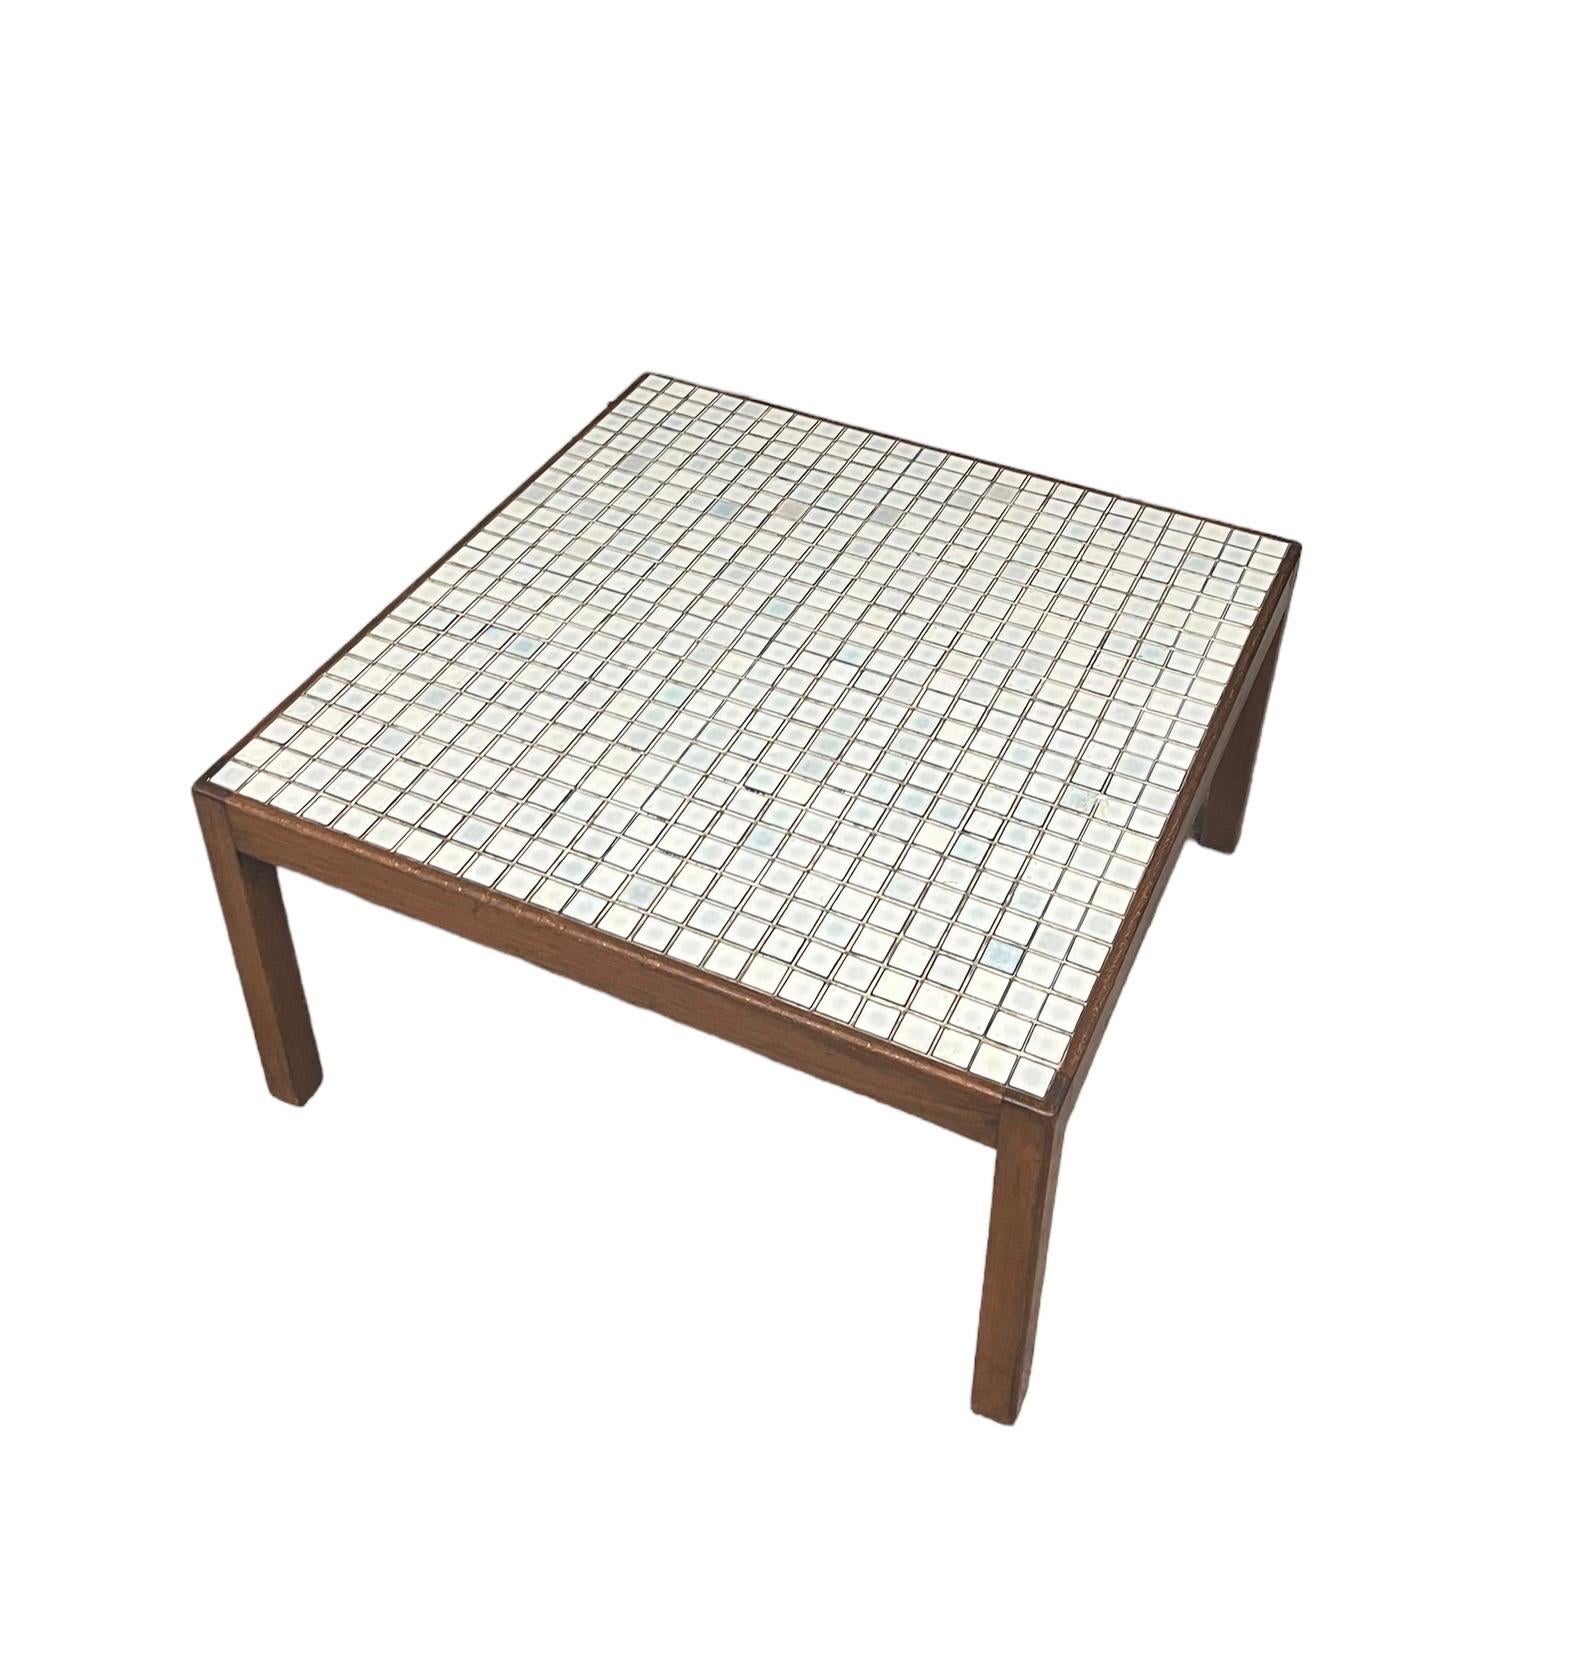 Vintage Mid Century Modern Walnut Table With Tile Top In Good Condition For Sale In Seattle, WA